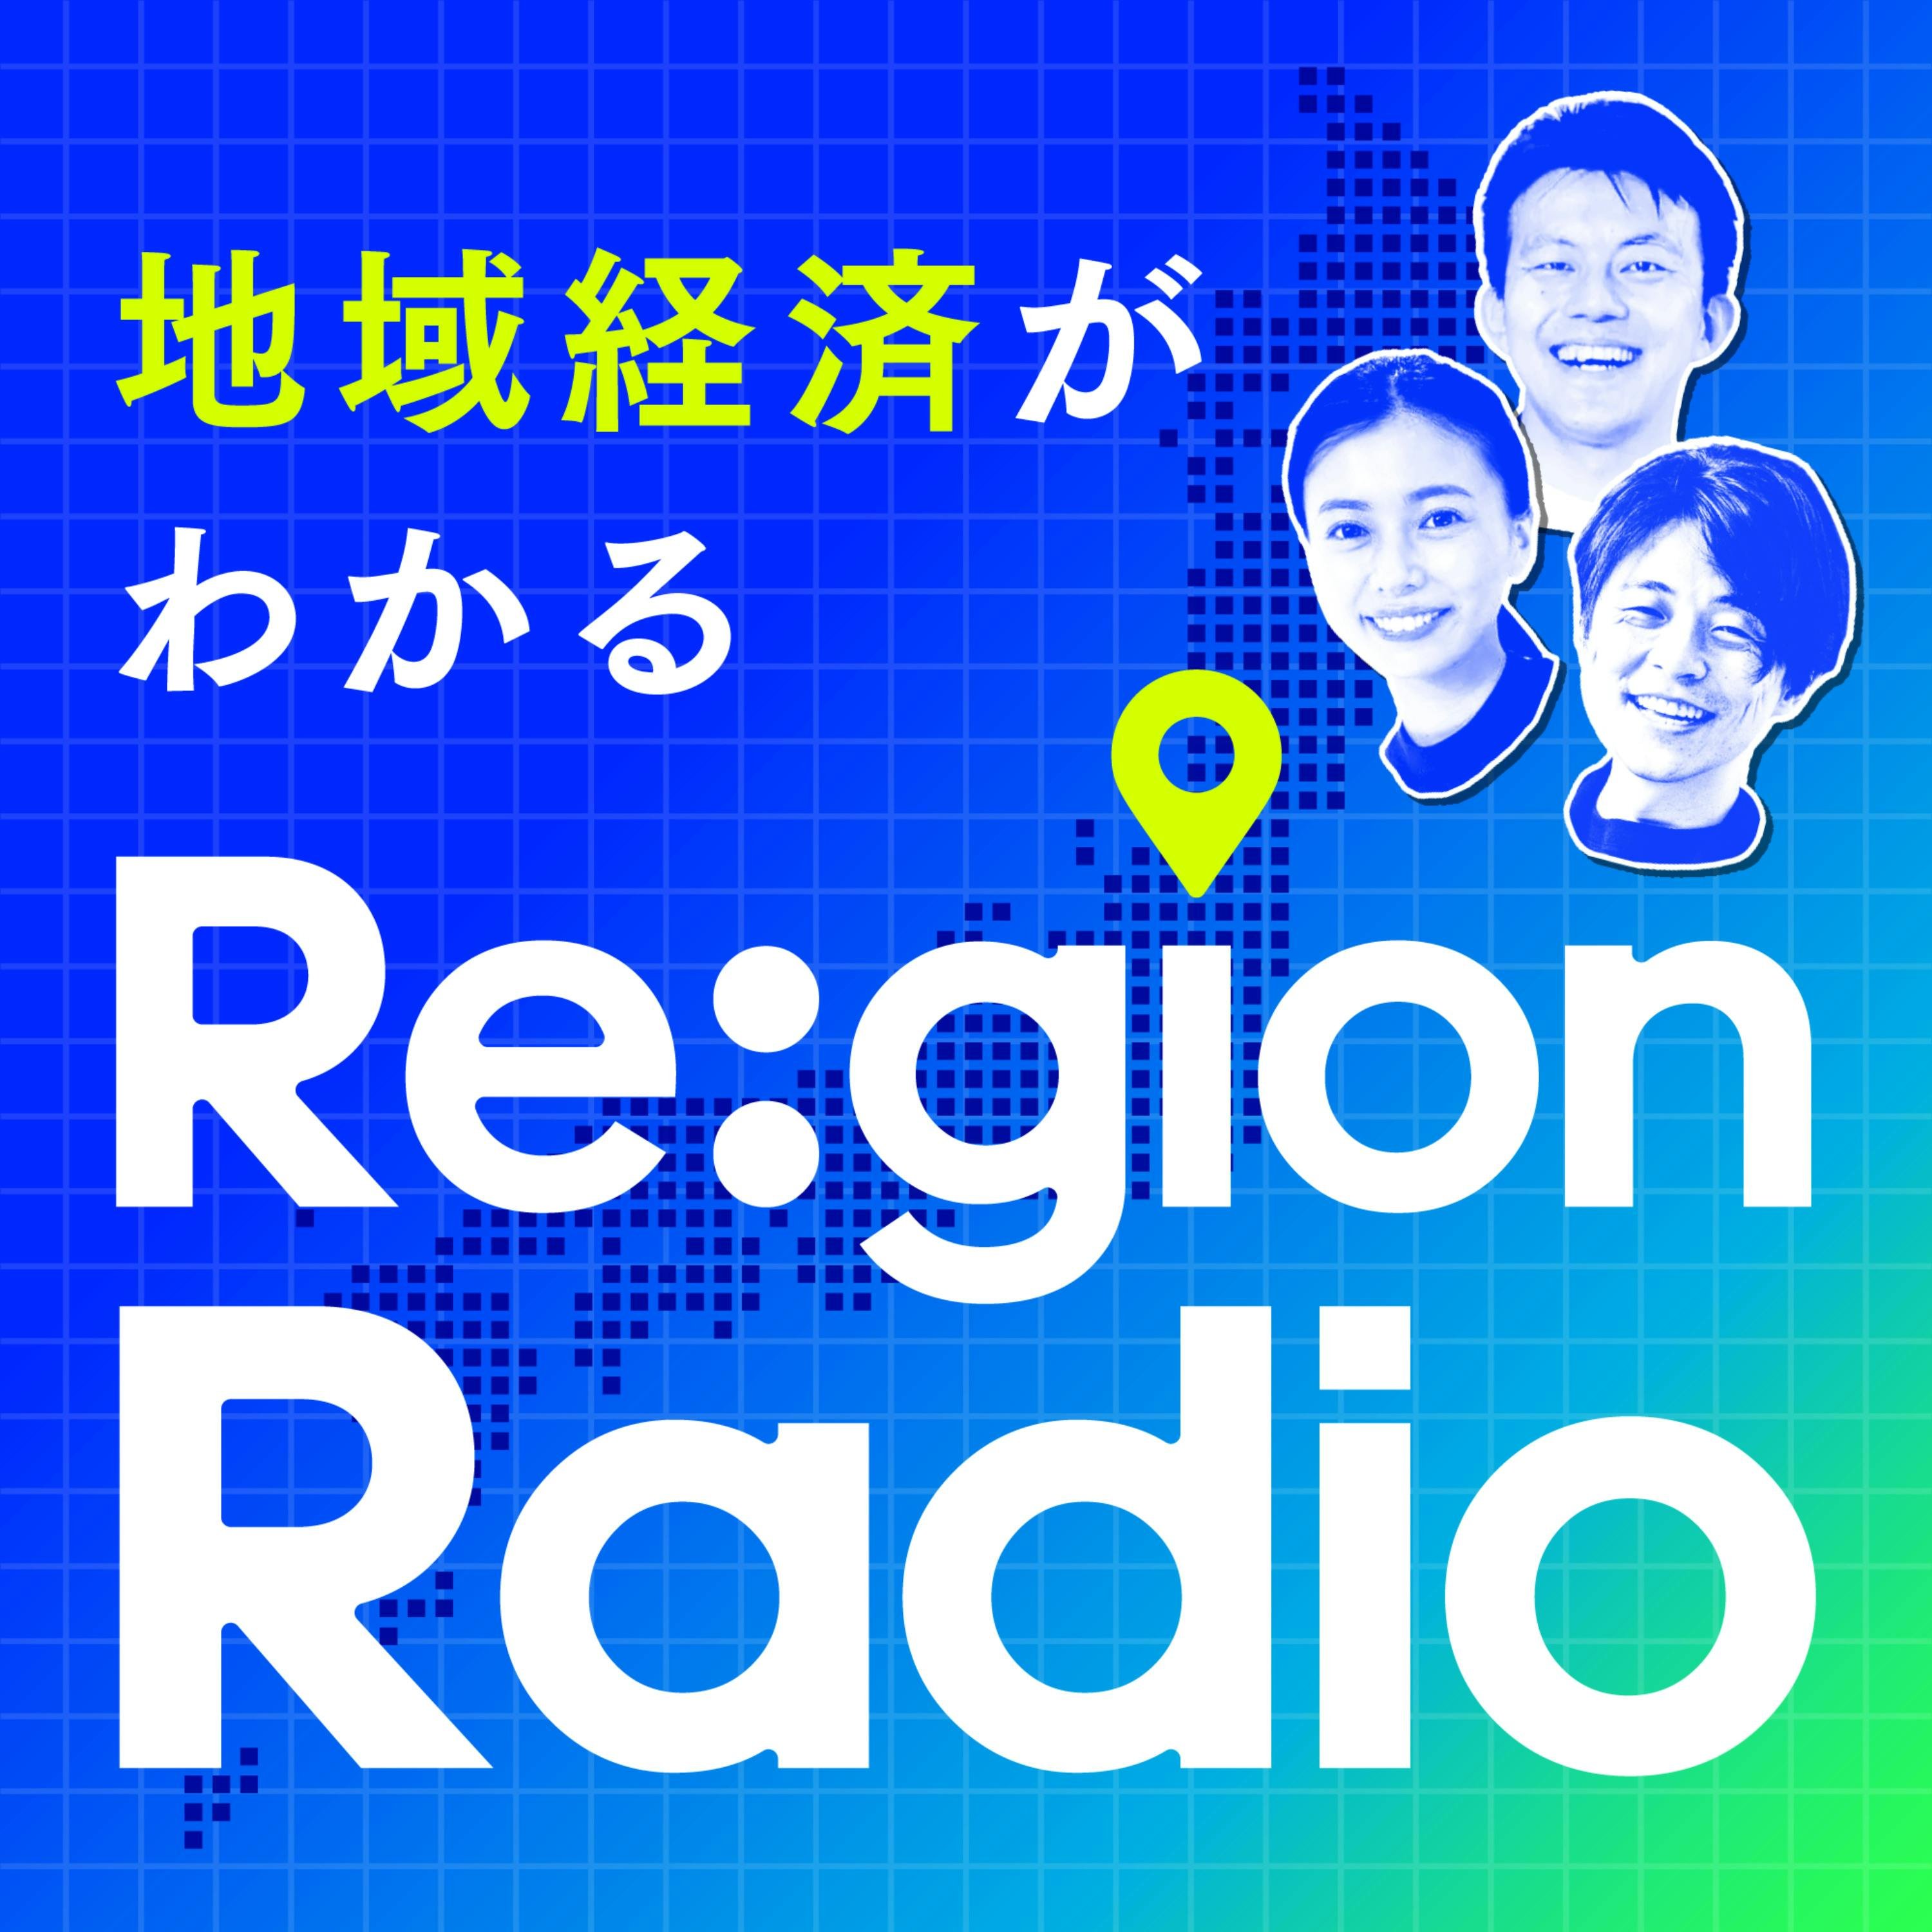 Podcasts　Numbers,　Listener　Contacts,　Similar　地域経済がわかる　Re:gion　Radio